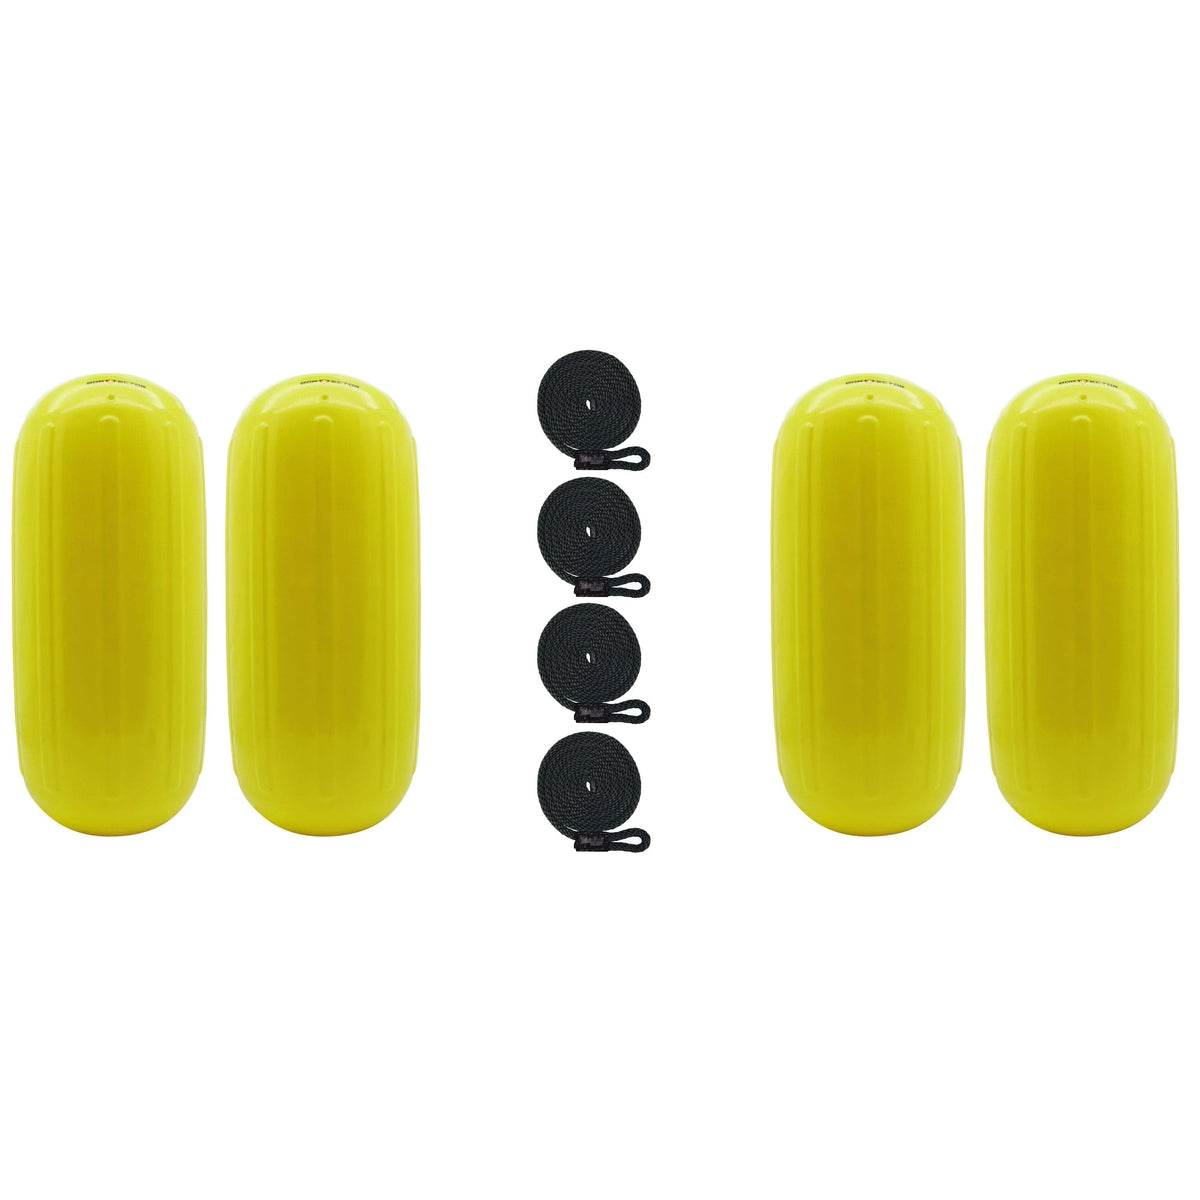 Extreme Max Not Qualified for Free Shipping Extreme Max BoatTector HTM Fender 4-pk 10" x 27" Neon Yellow #3006.8521.4